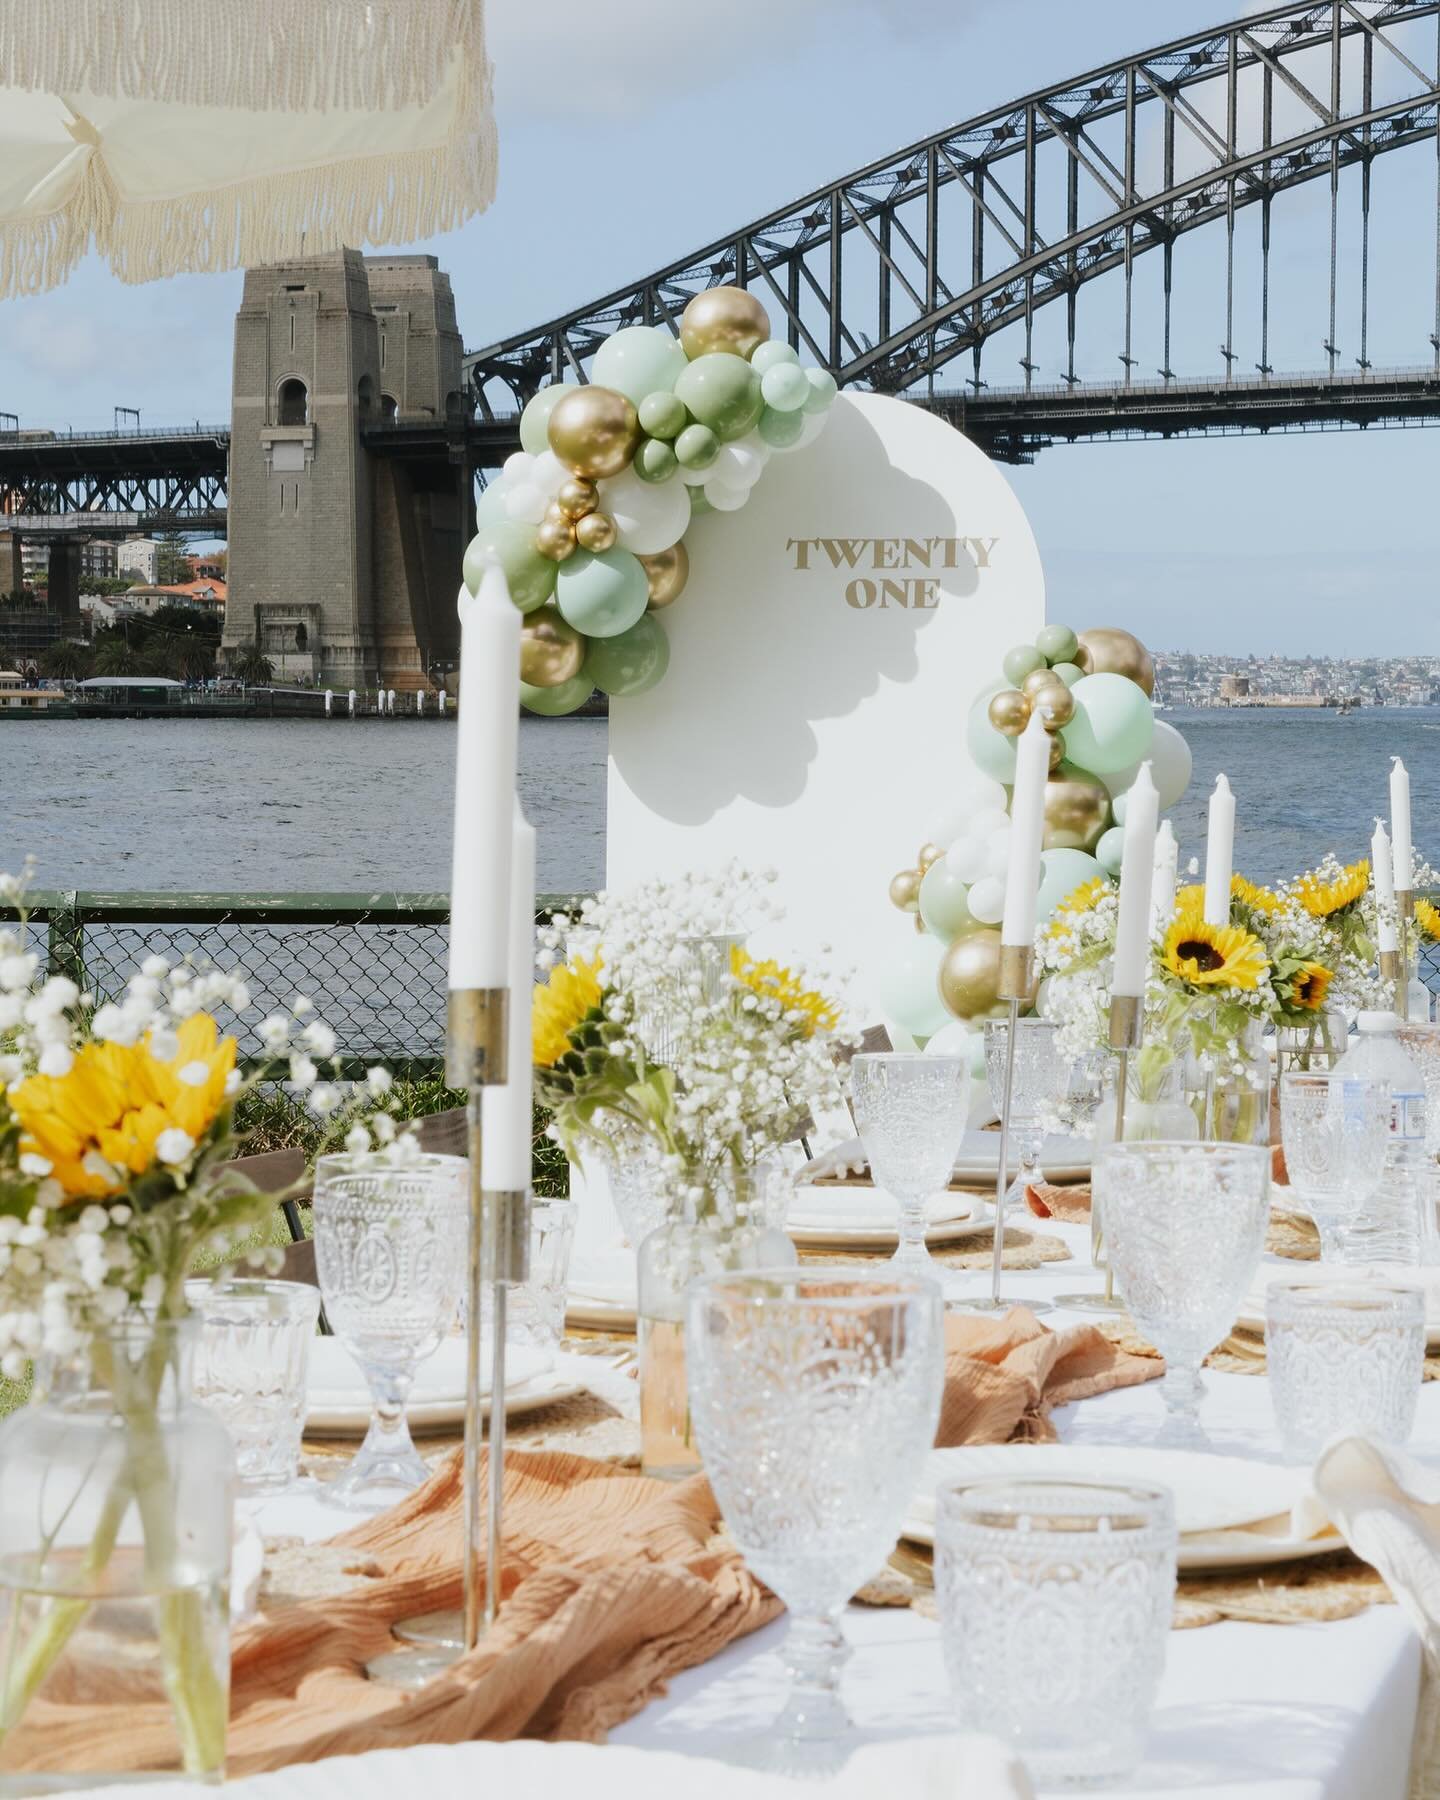 Jorja&rsquo;s 21st birthday was a show stopper! 

Photography @hillseventssydney 
Flowers @ivylanefloral 
Backdrop @inflatedcreated 

#21st #21stbirthday #picnic #picnicparty #sydney #sydneyharbour